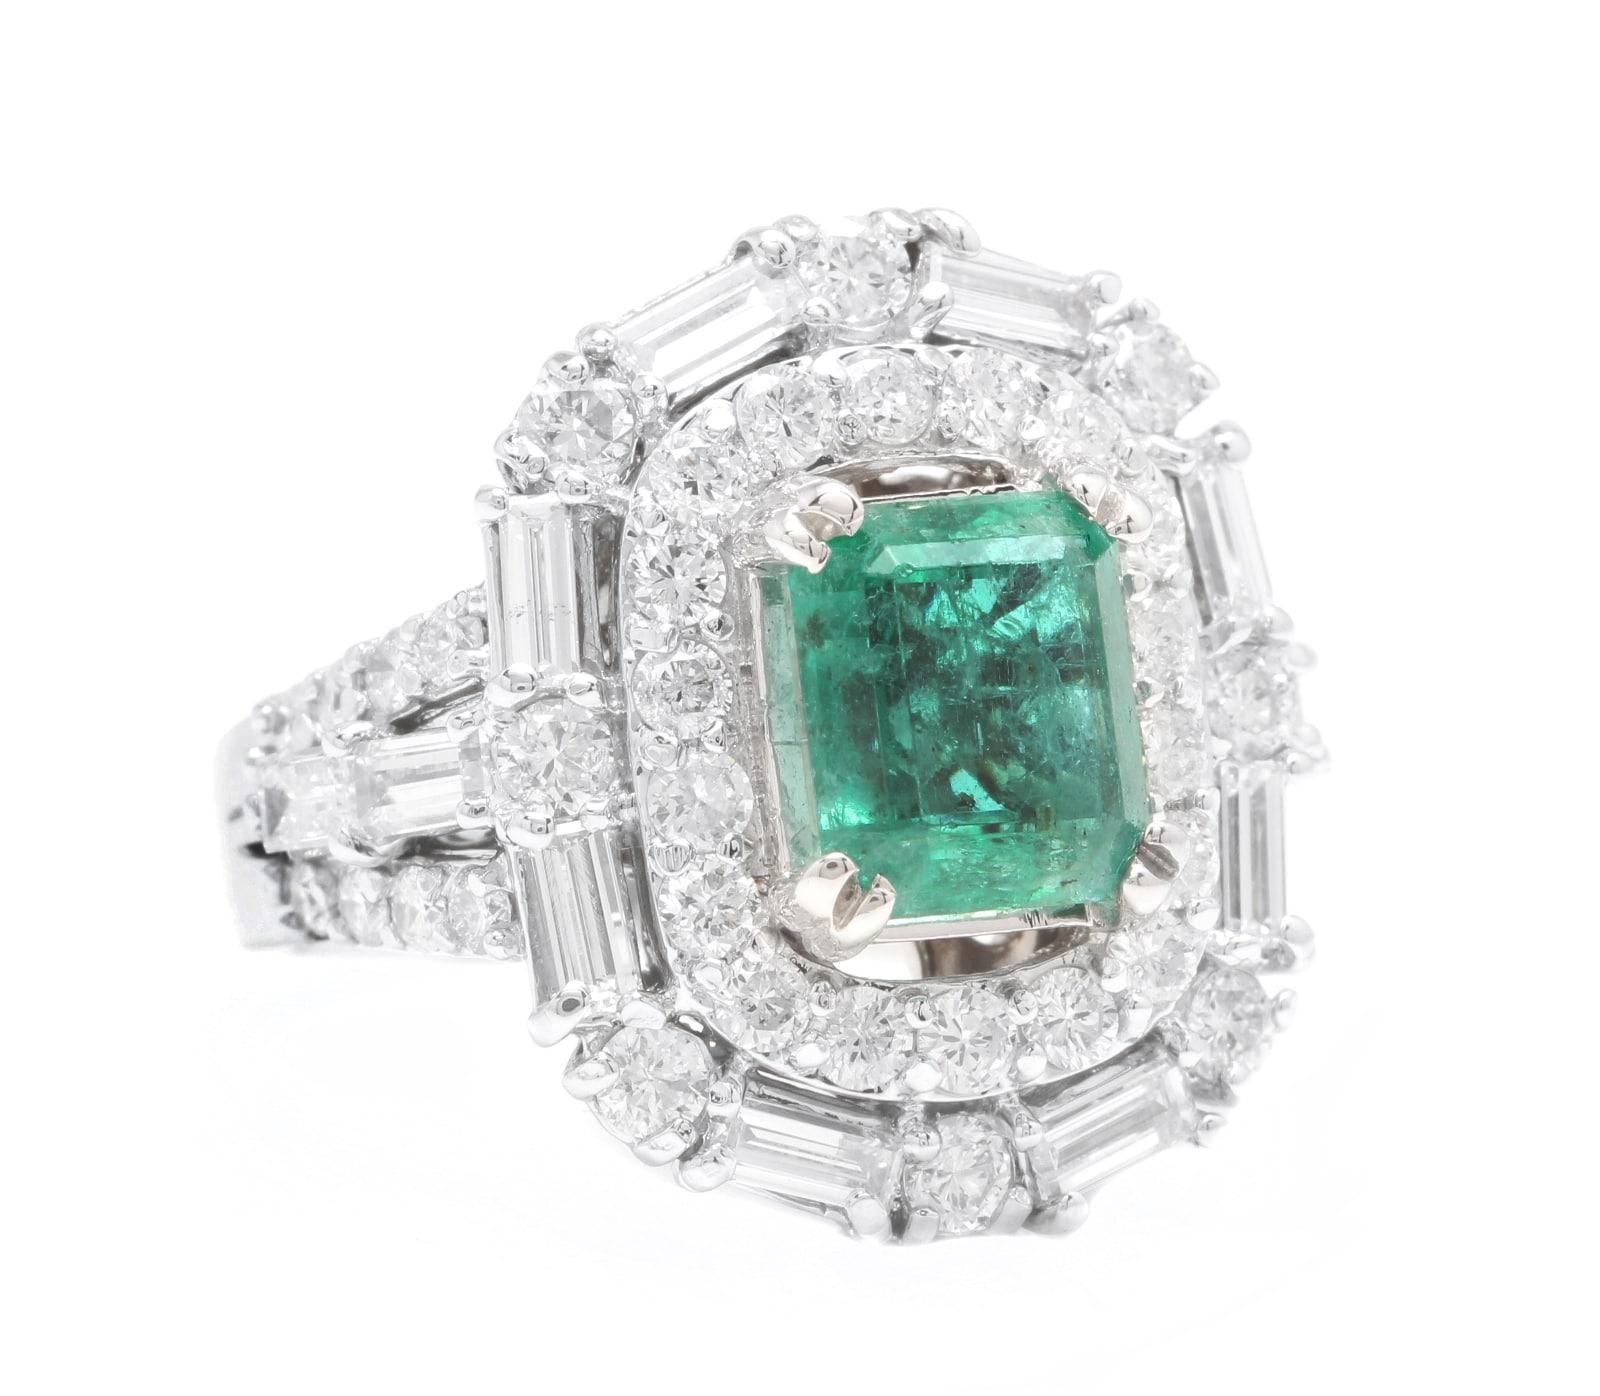 5.40 Carats Natural Emerald and Diamond 14K Solid White Gold Ring

Suggested Replacement Value: Approx. $9,000.00

Total Natural Green Emerald Weight is: Approx. 2.80 Carats (transparent)

Emerald Measures: Approx. 9 x 8mm

Emerald Treatment: